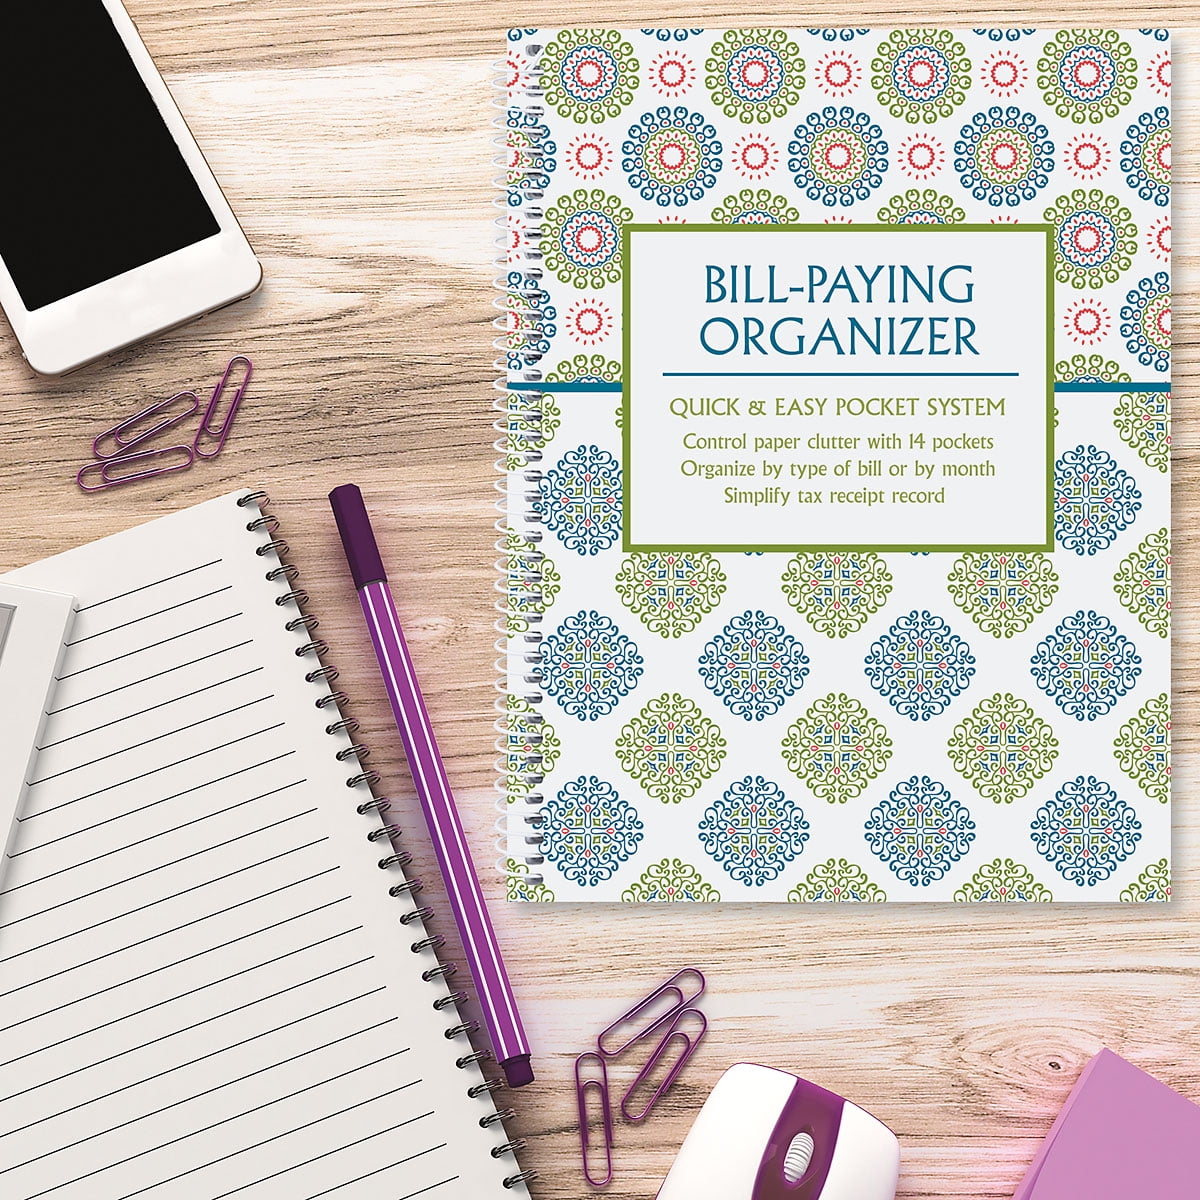 Bill Tracking Receipt Storage 14 Pocket Pages Navy Blossoms Bill Paying Organizer Large 9 by 12 inch Spiral-Bound 32 Label Stickers 